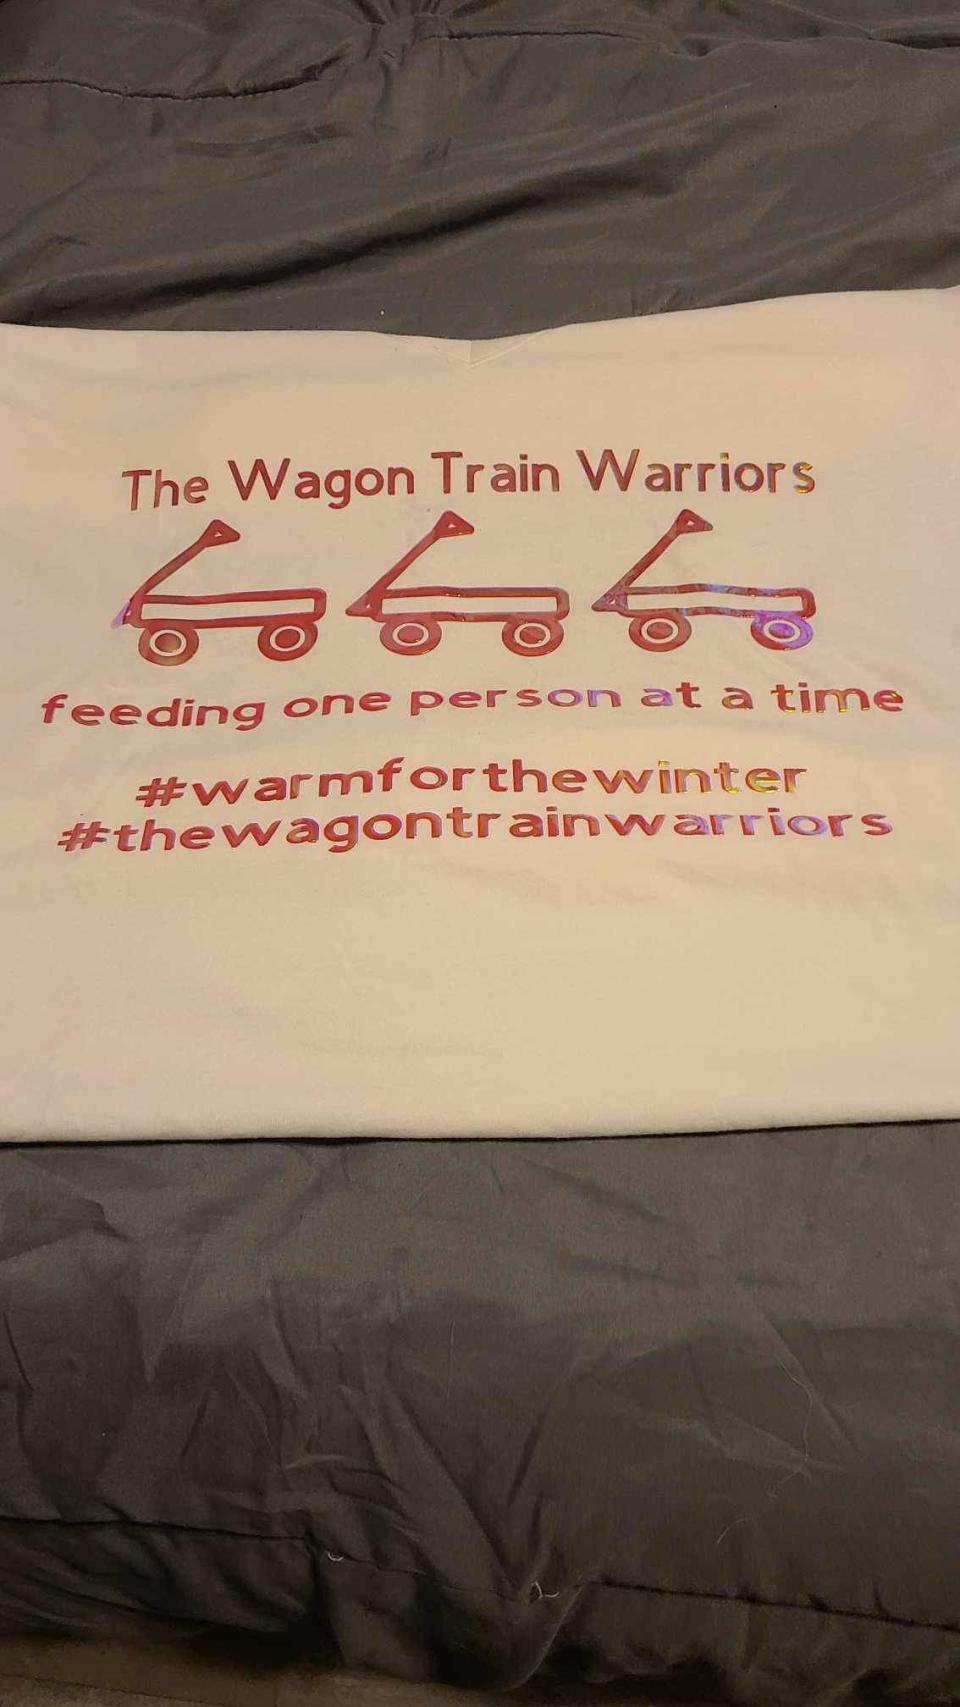 Volunteers for Warm for the Winter, also known as the Wagon Train Warriors, feed homeless people every week in Binghamton.